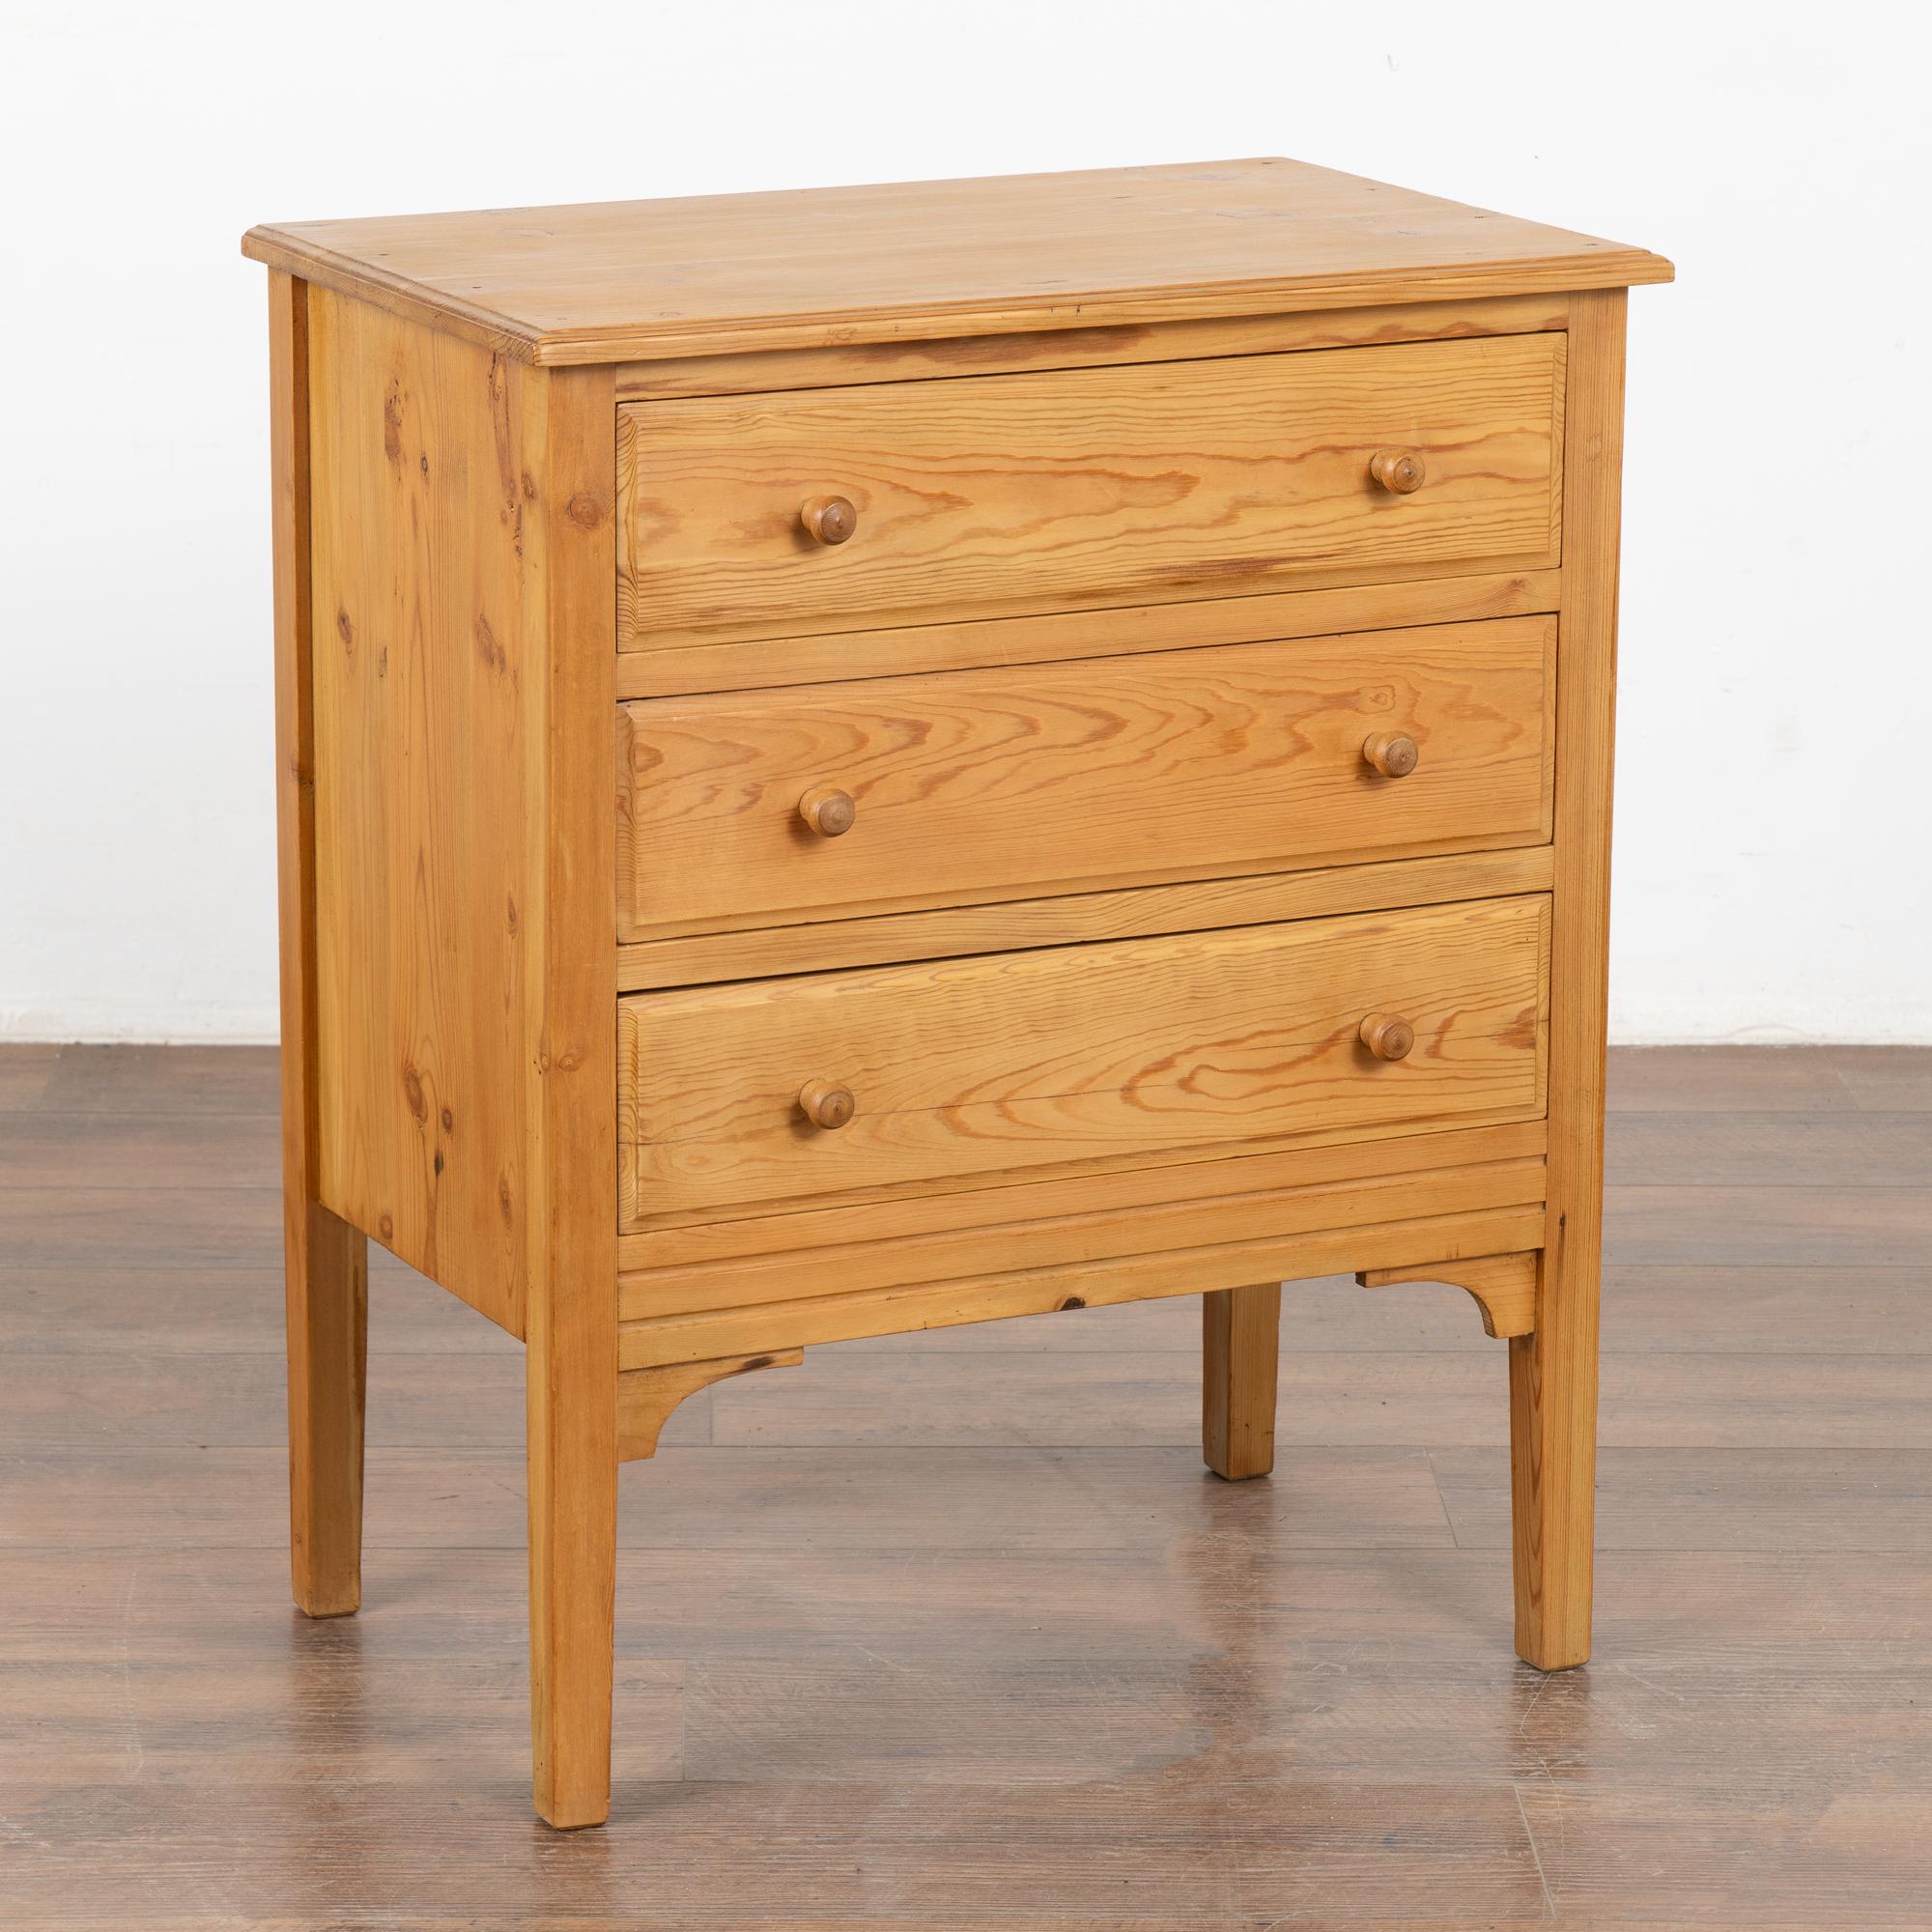 Antique pine nightstand or small chest of three drawers with clean lines.
Note the natural wax finish that brings out the warmth of the pine. 
Restored, this nightstand is strong, stable and ready for use.
Drawers function, open with wood pulls.
Any